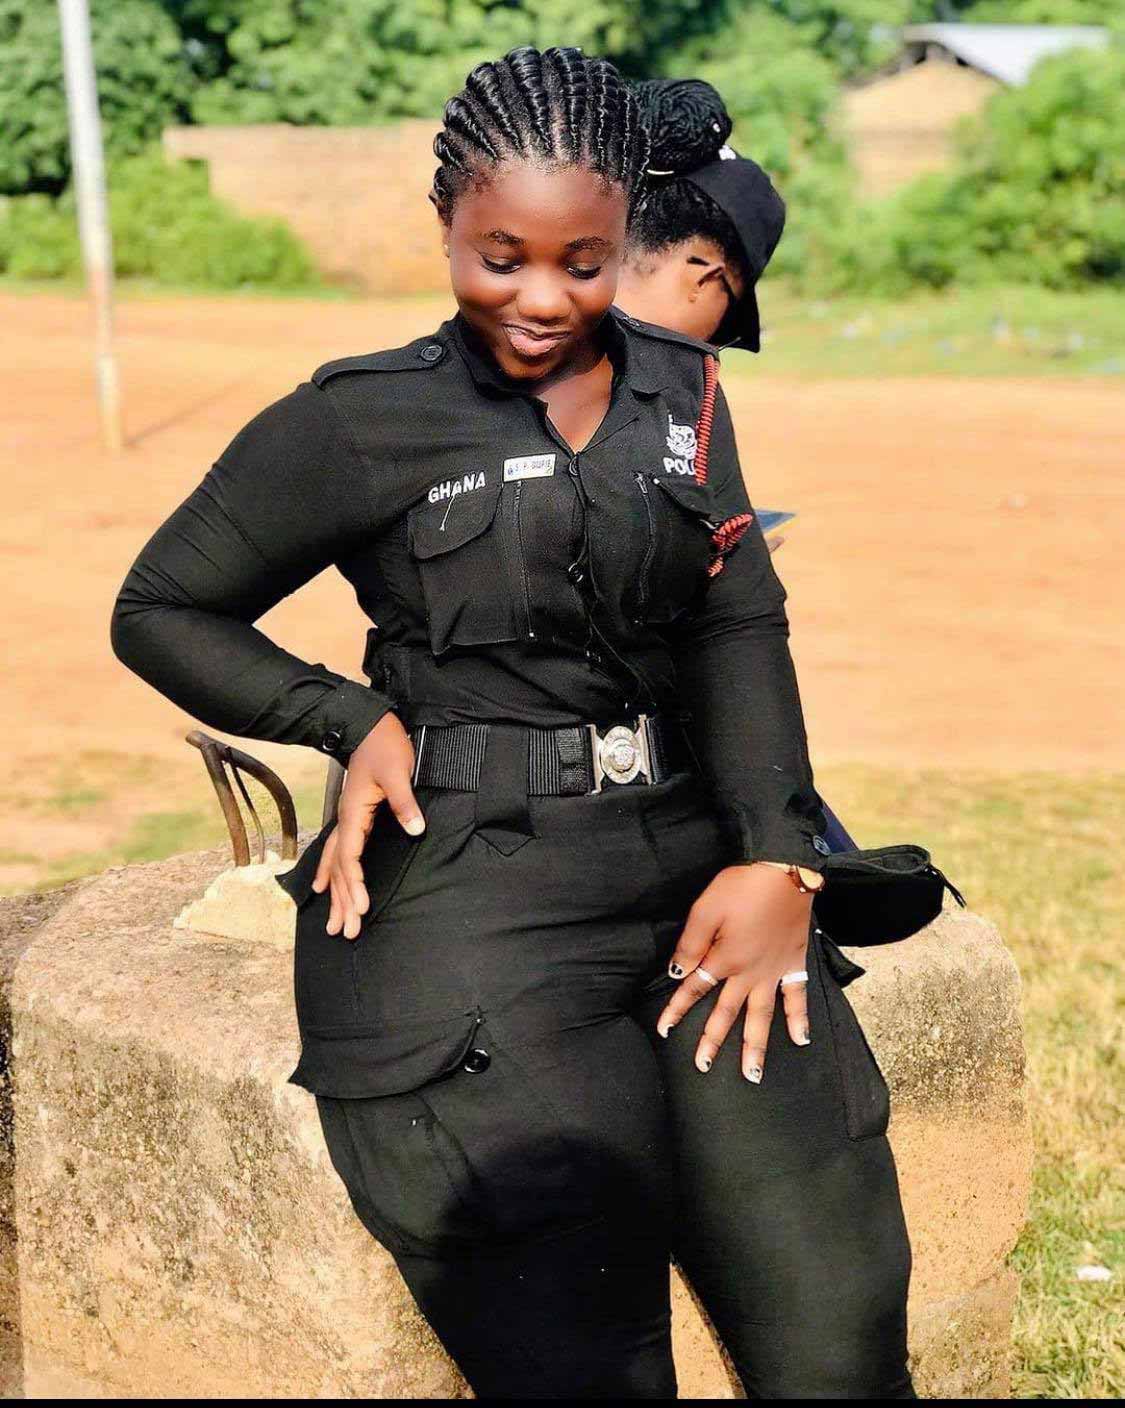 Photos Of Ama Serwaa The Trending Ghanaian Police Officer Tagged As 